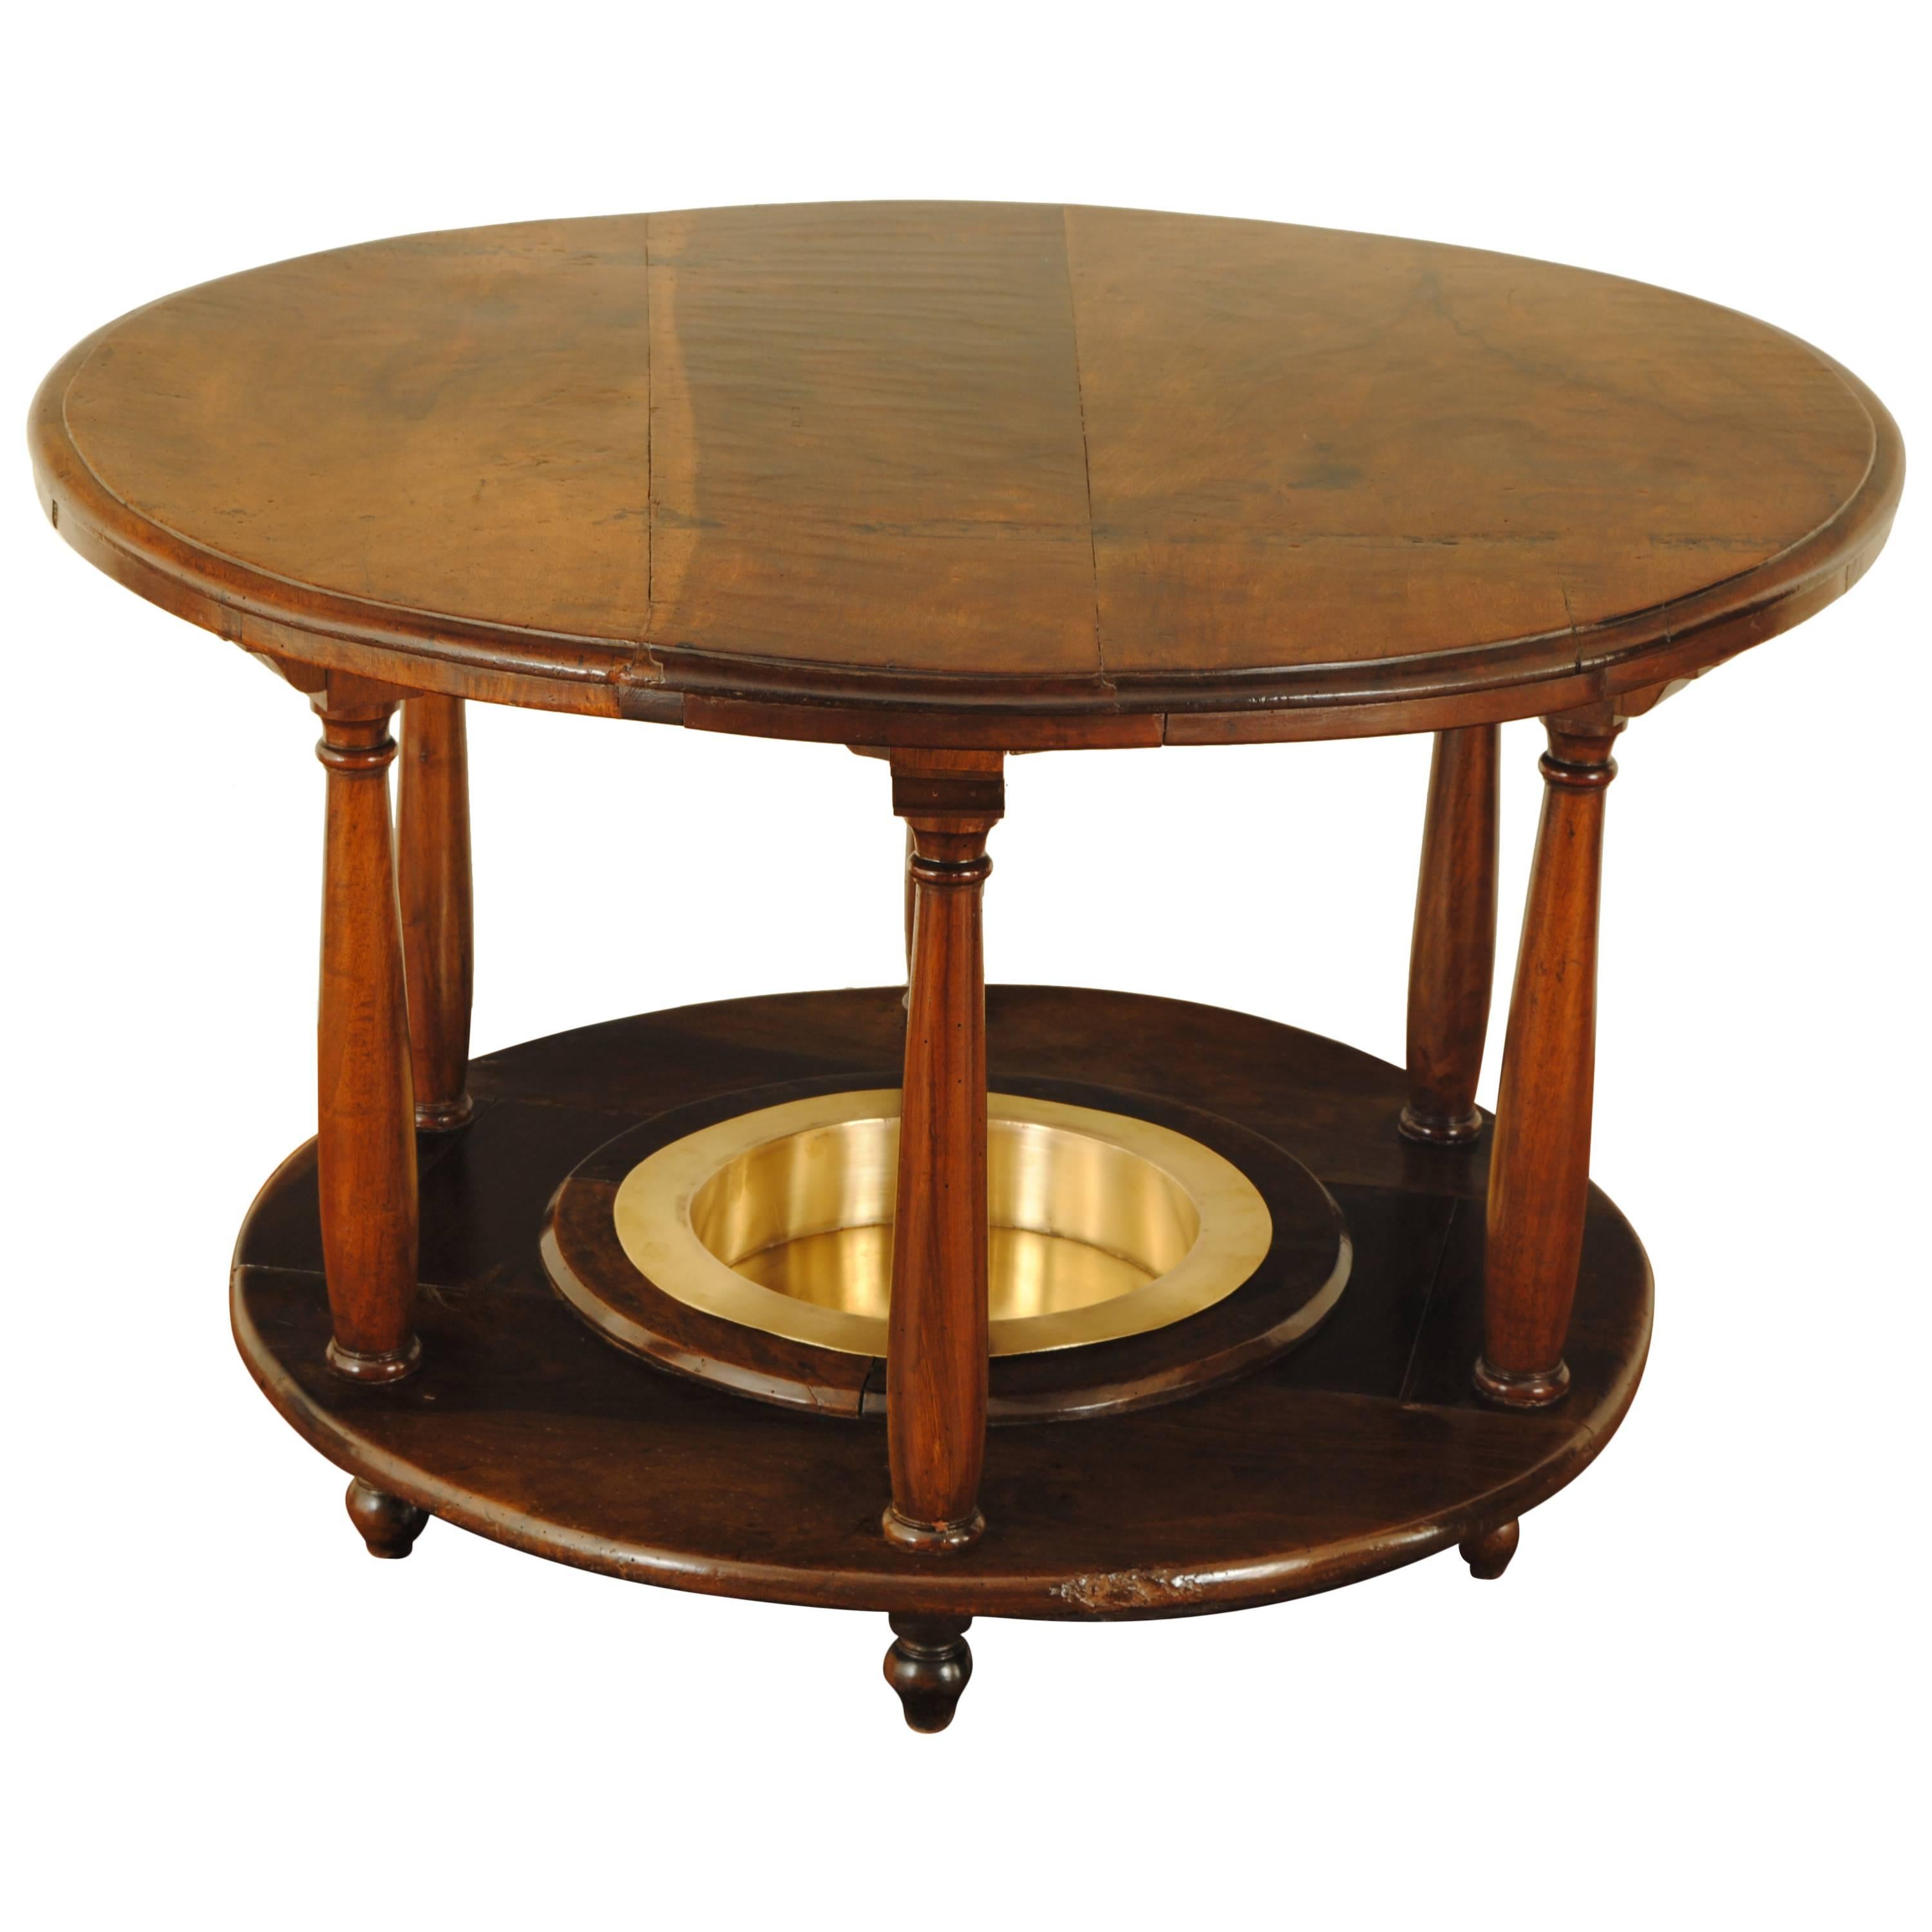 Spanish Neoclassical Walnut and Brass Brazier Table, 19th Century